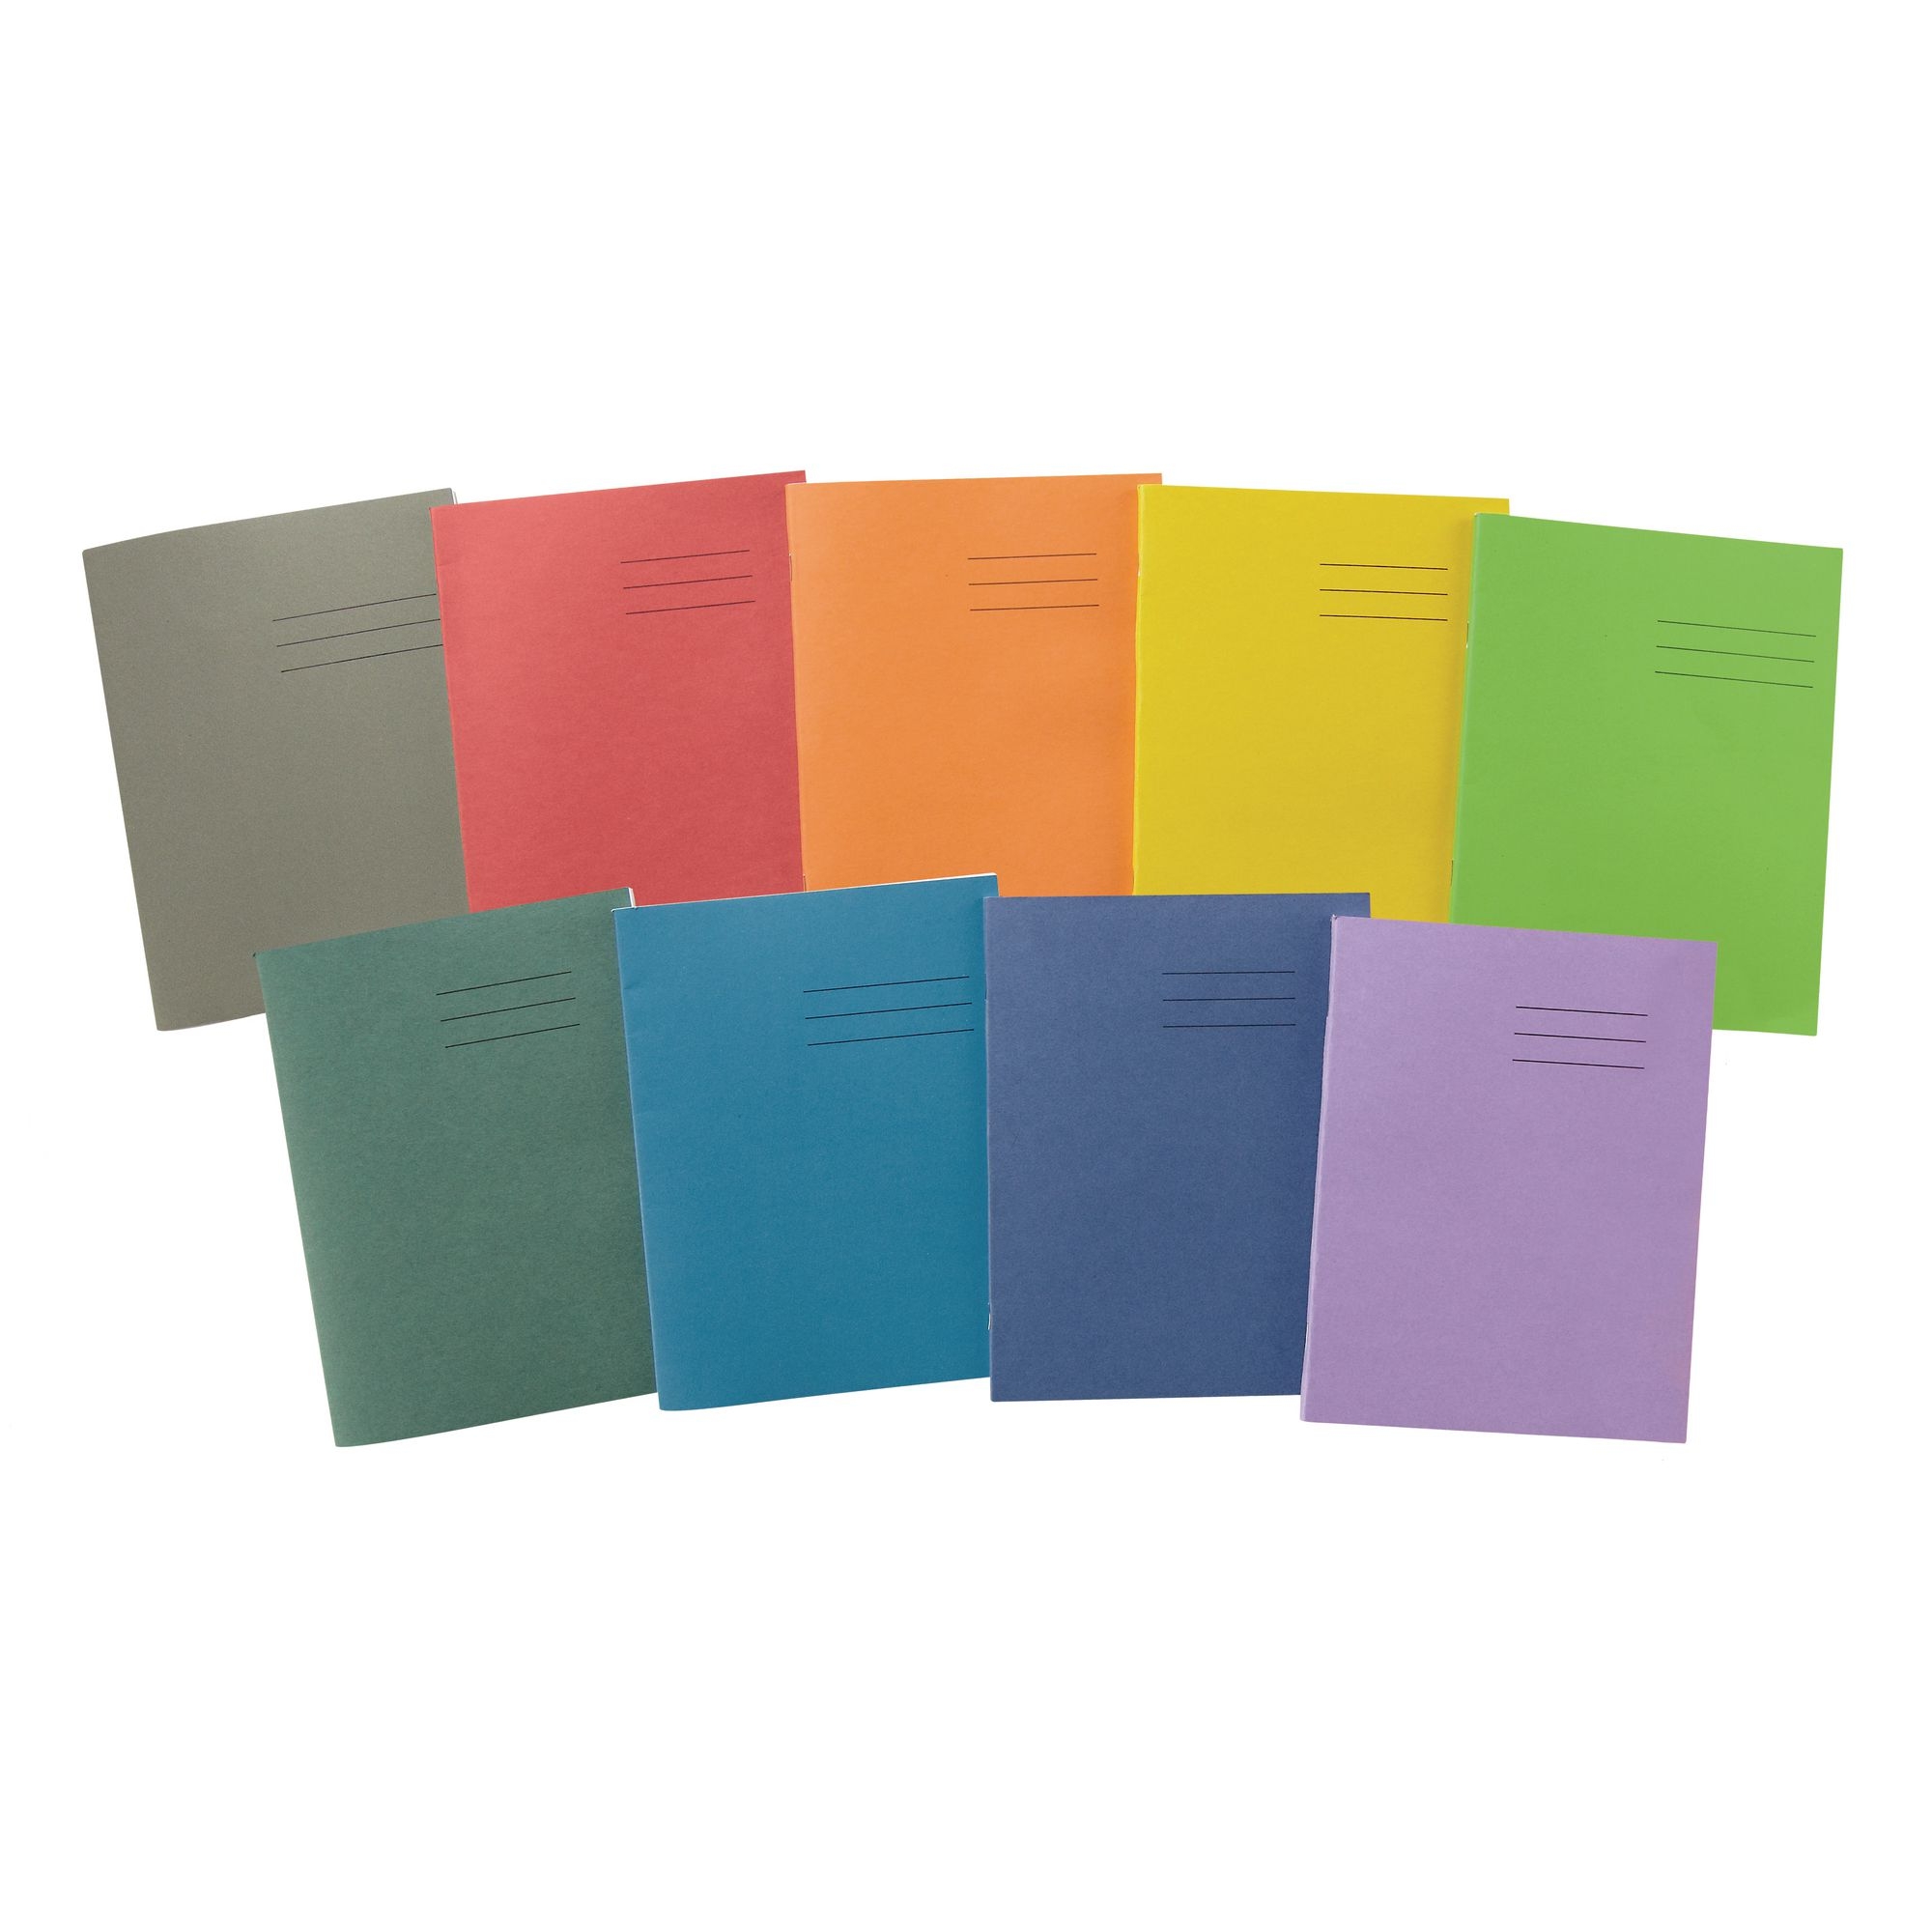 Orange 9x7" Exercise Book 48-Page, 12mm Ruled / Plain Alternative - Pack of 100